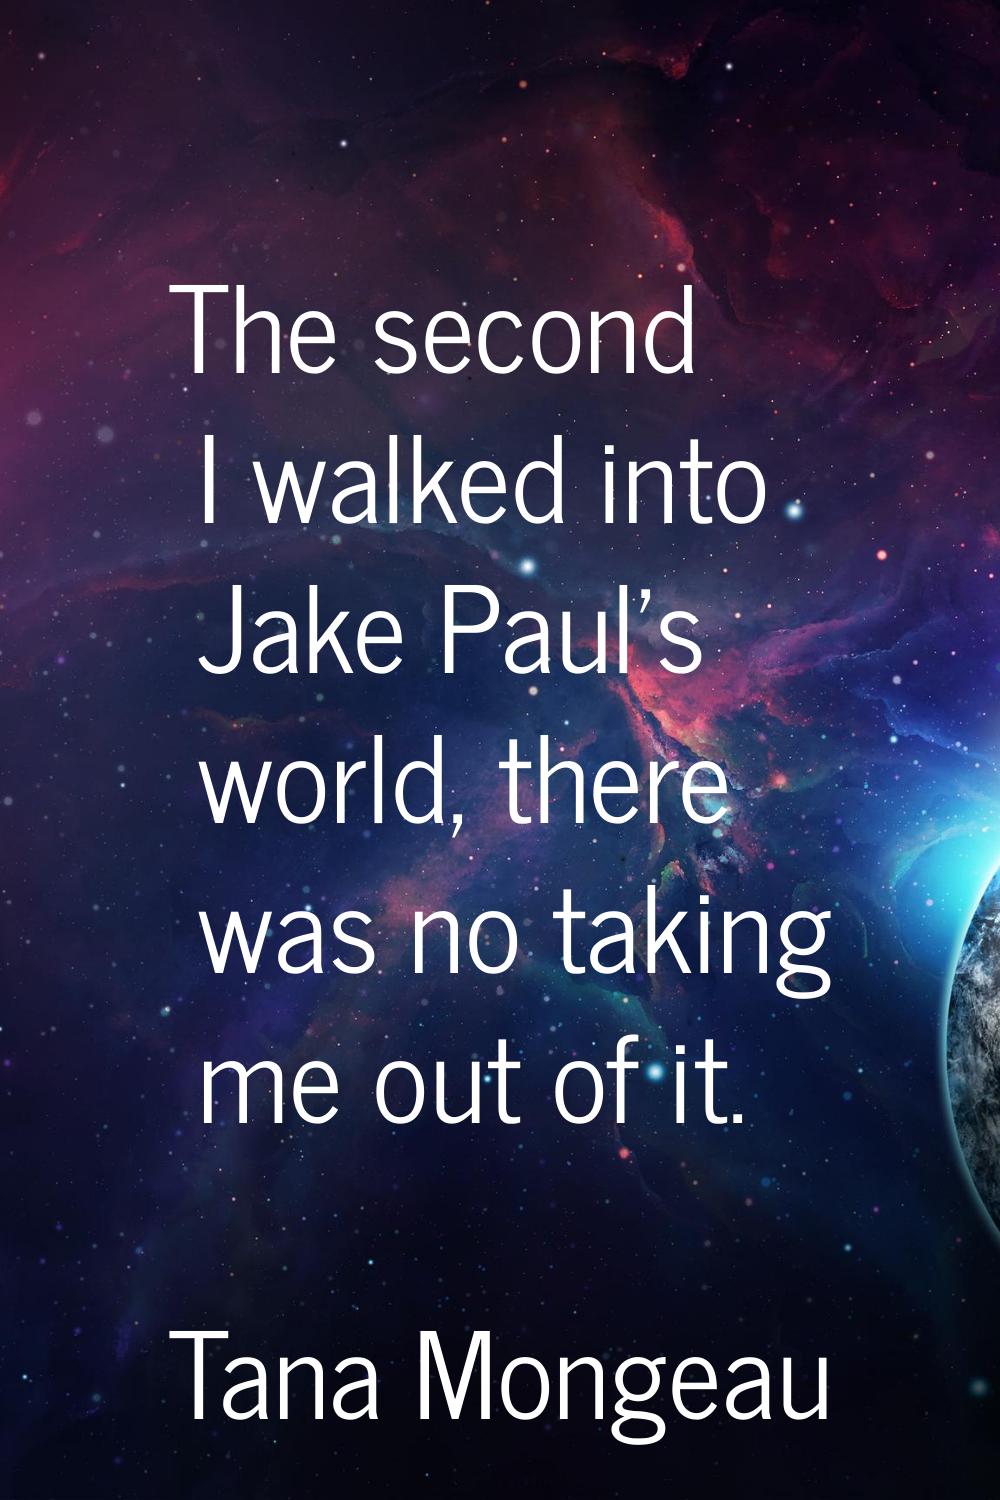 The second I walked into Jake Paul's world, there was no taking me out of it.